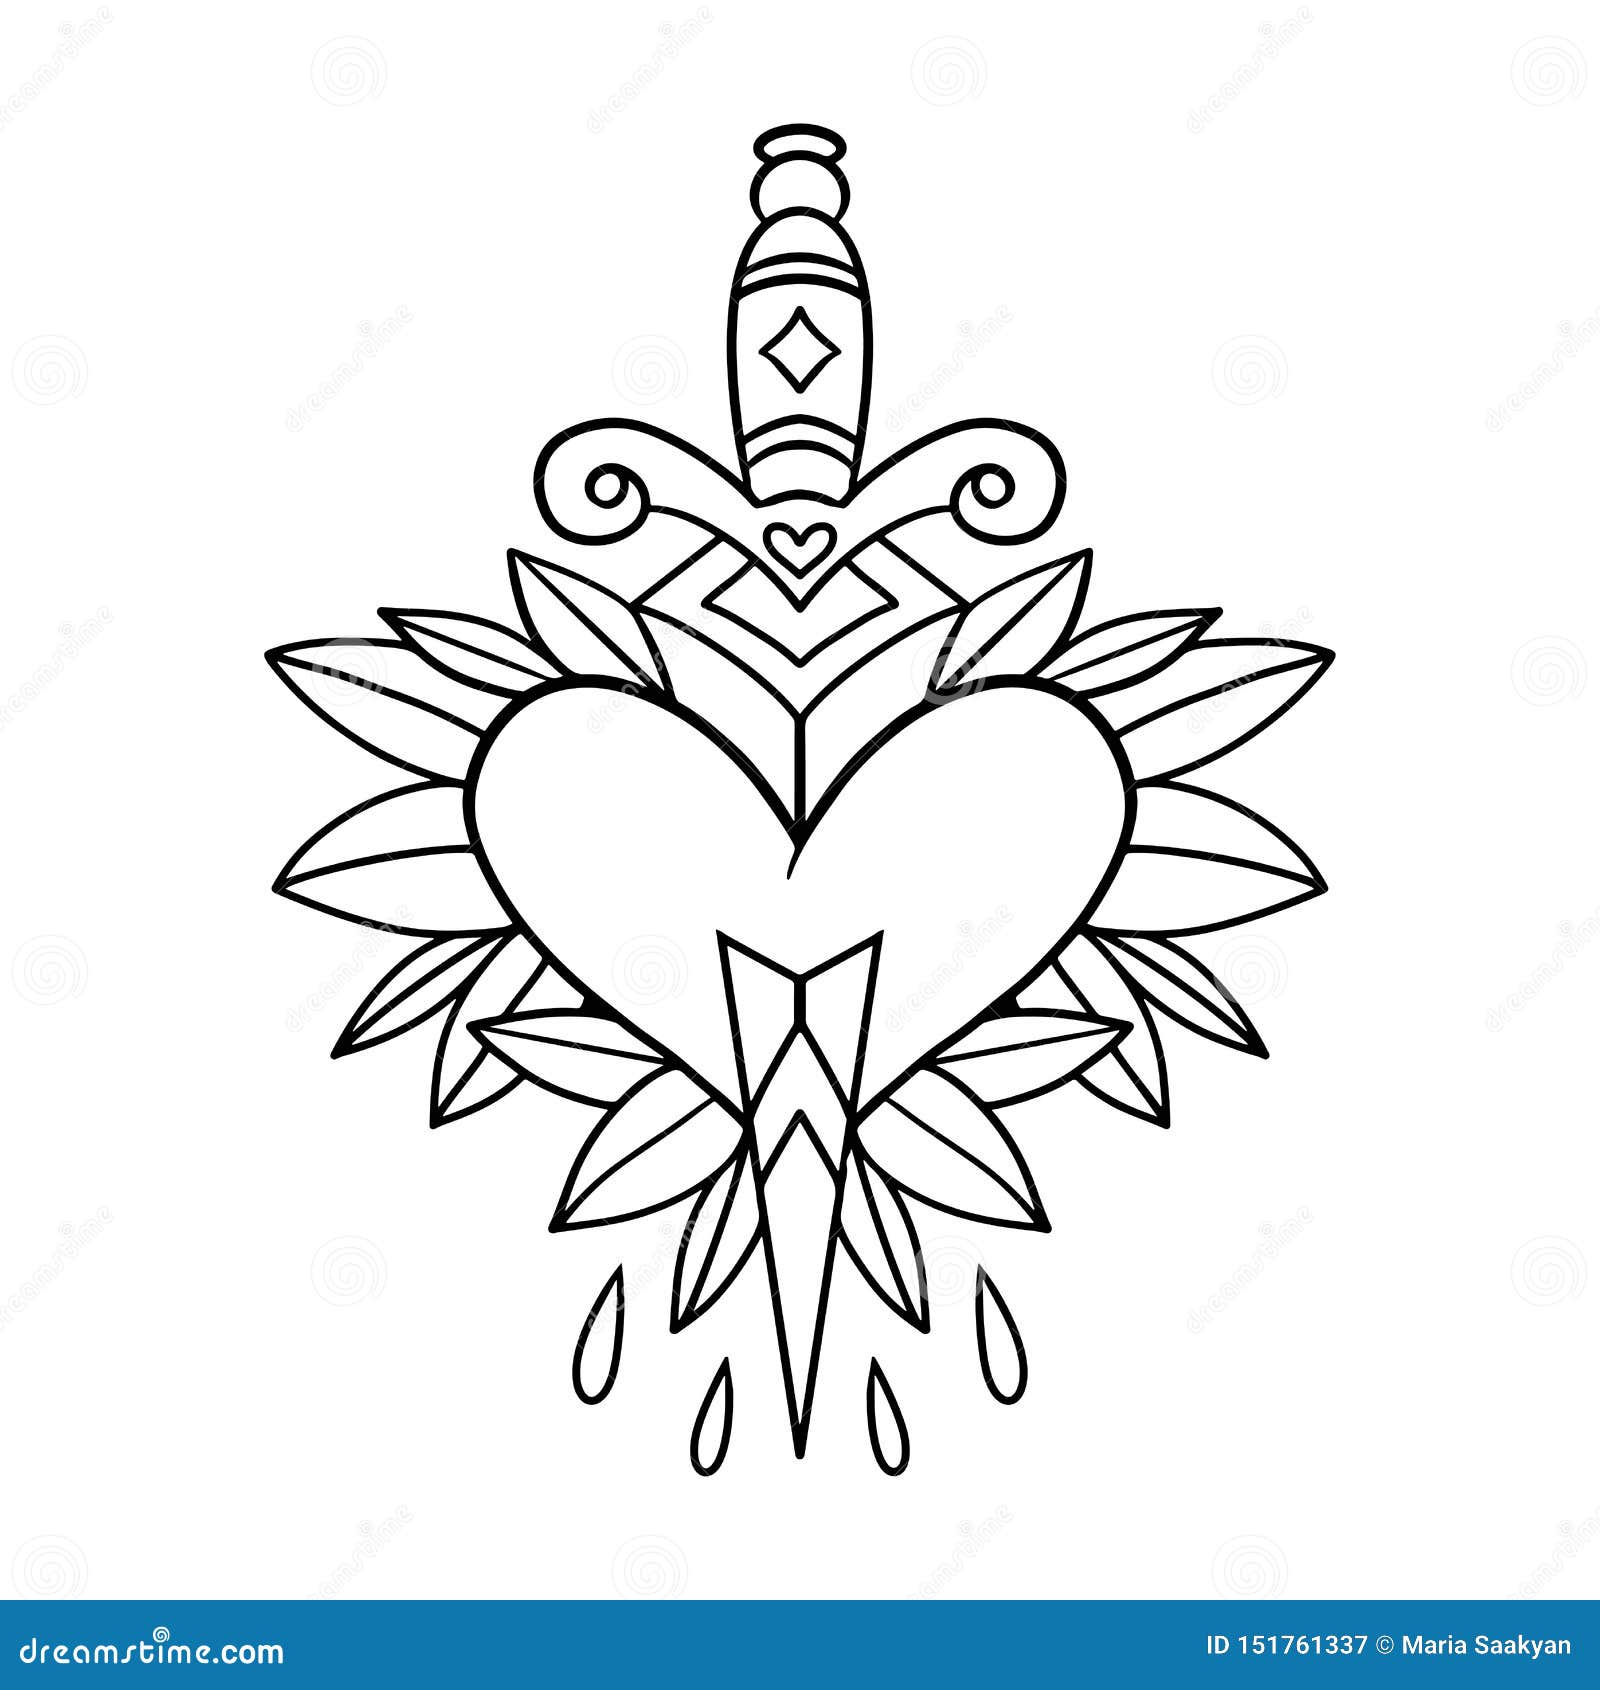 Cool Tattoo I Found On Pinterest   Dagger Through A Heart HD Png  Download  kindpng